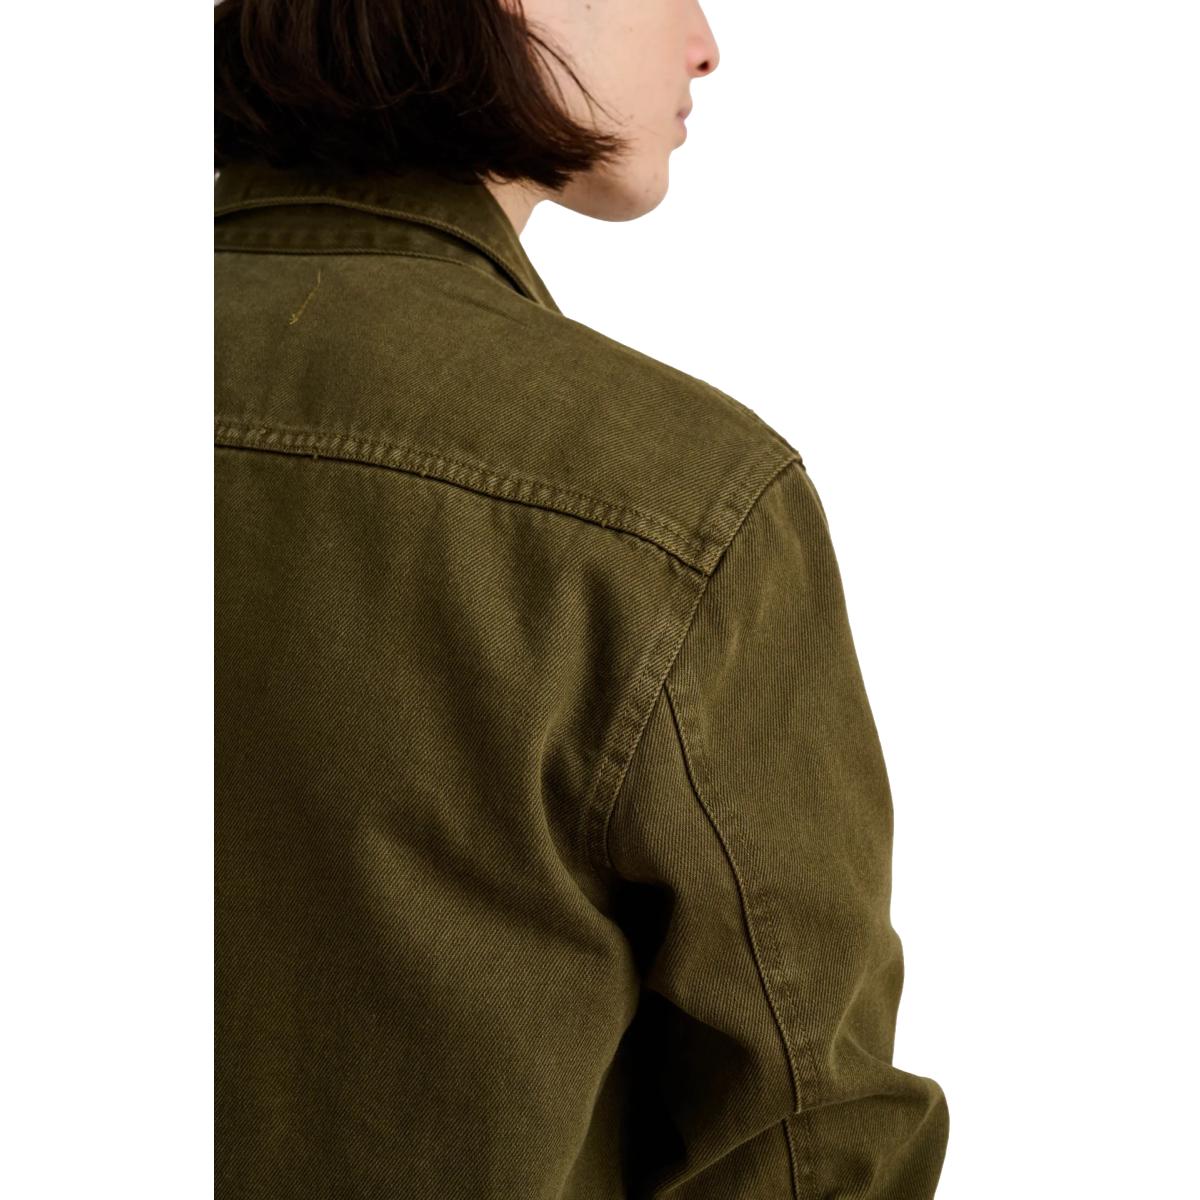 Garment Dyed Work Jacket Recycled Denim Military Olive -